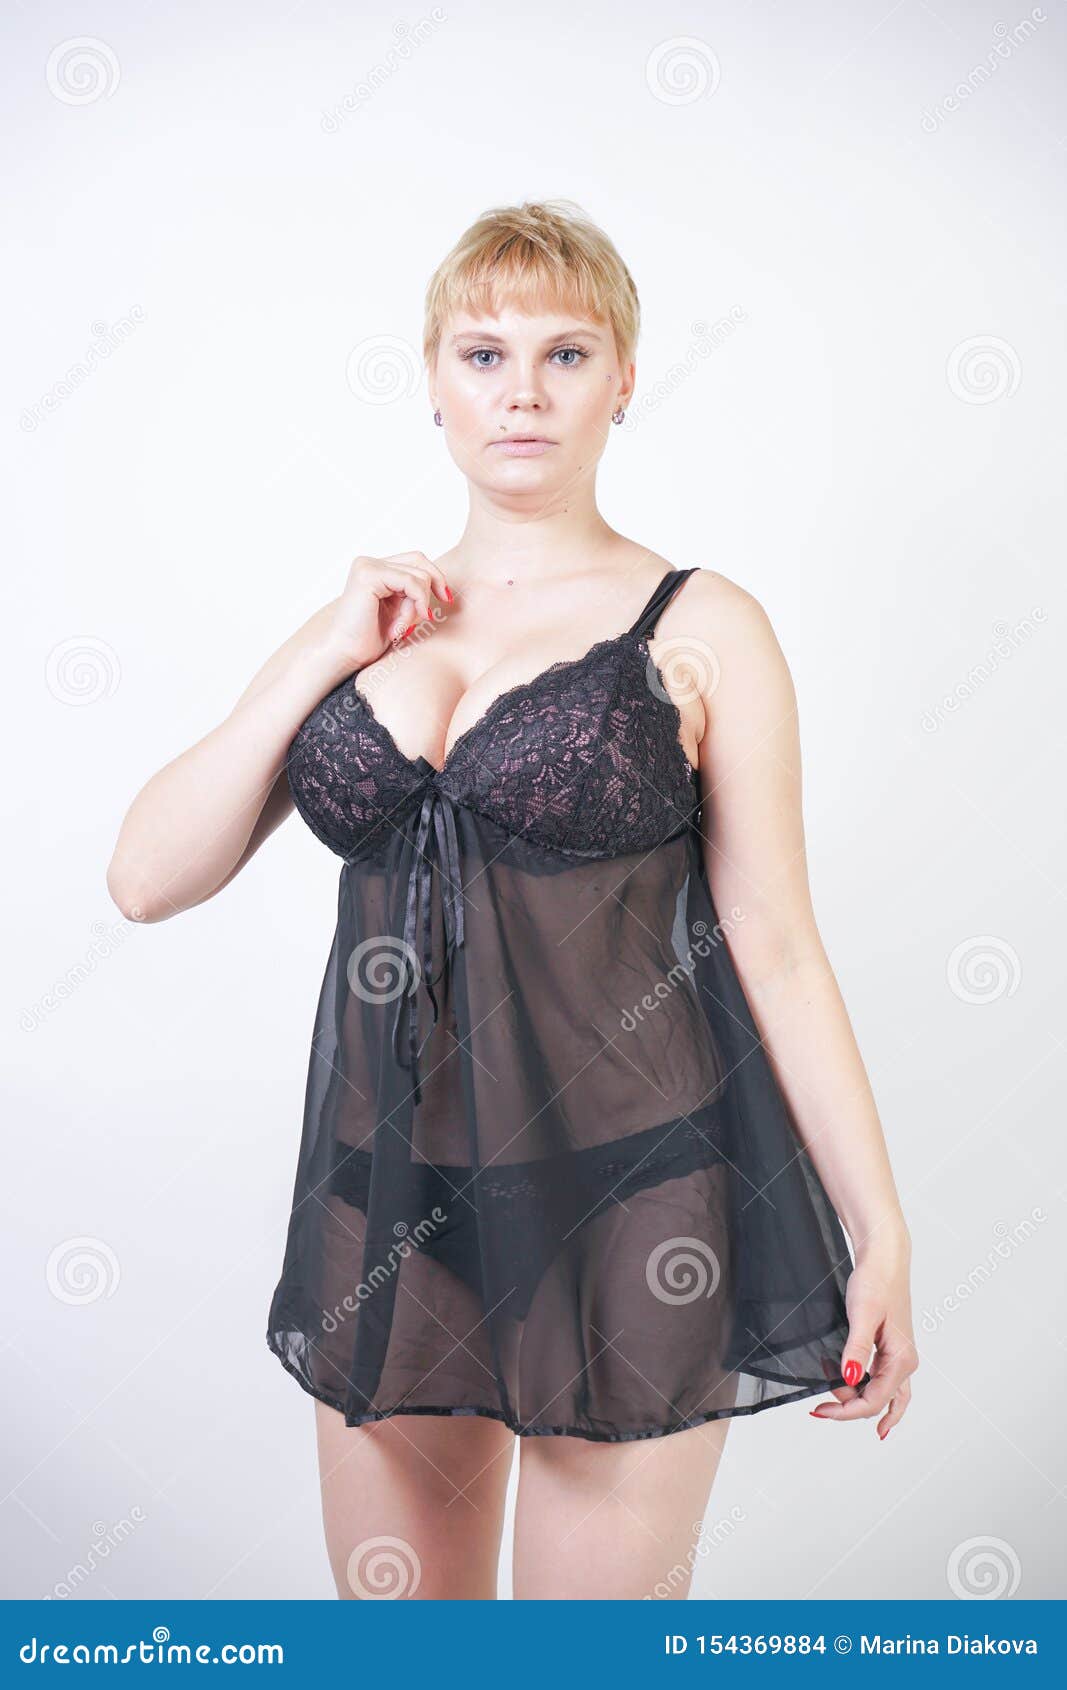 Hot Chubby Woman Wearing Lingerie Transparent Black Dress Stock Photo -  Image of lingerie, chubby: 154369884